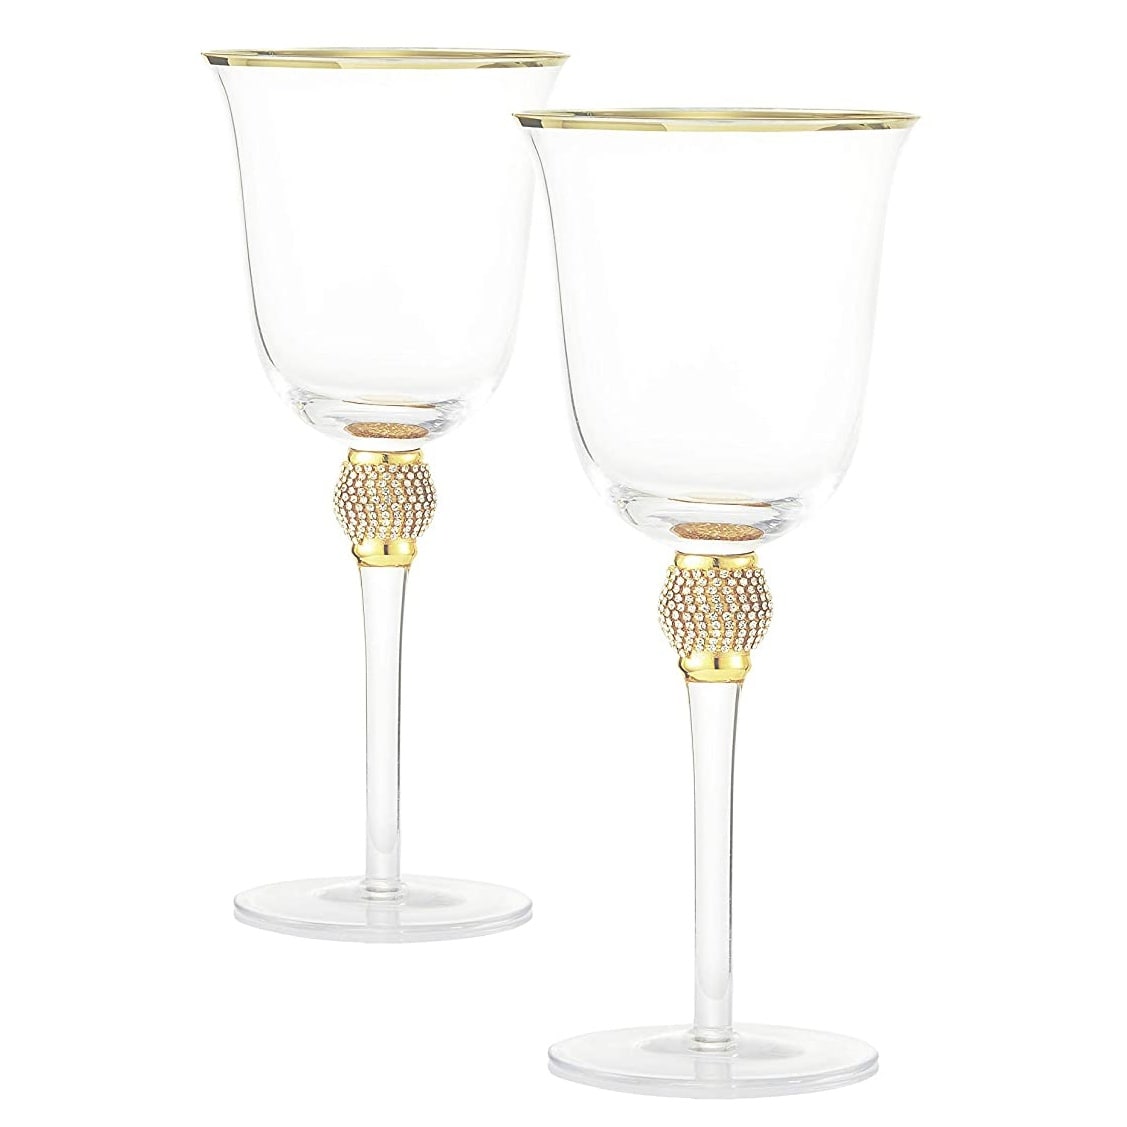 https://ak1.ostkcdn.com/images/products/is/images/direct/b0b68bf344cc0a3cad3daf0208ae1853ed30d056/Berkware-Elegant-Sparkling-Studded-Long-Stem-Rose-Glass-with-Gold-or-Silver-Rim.jpg